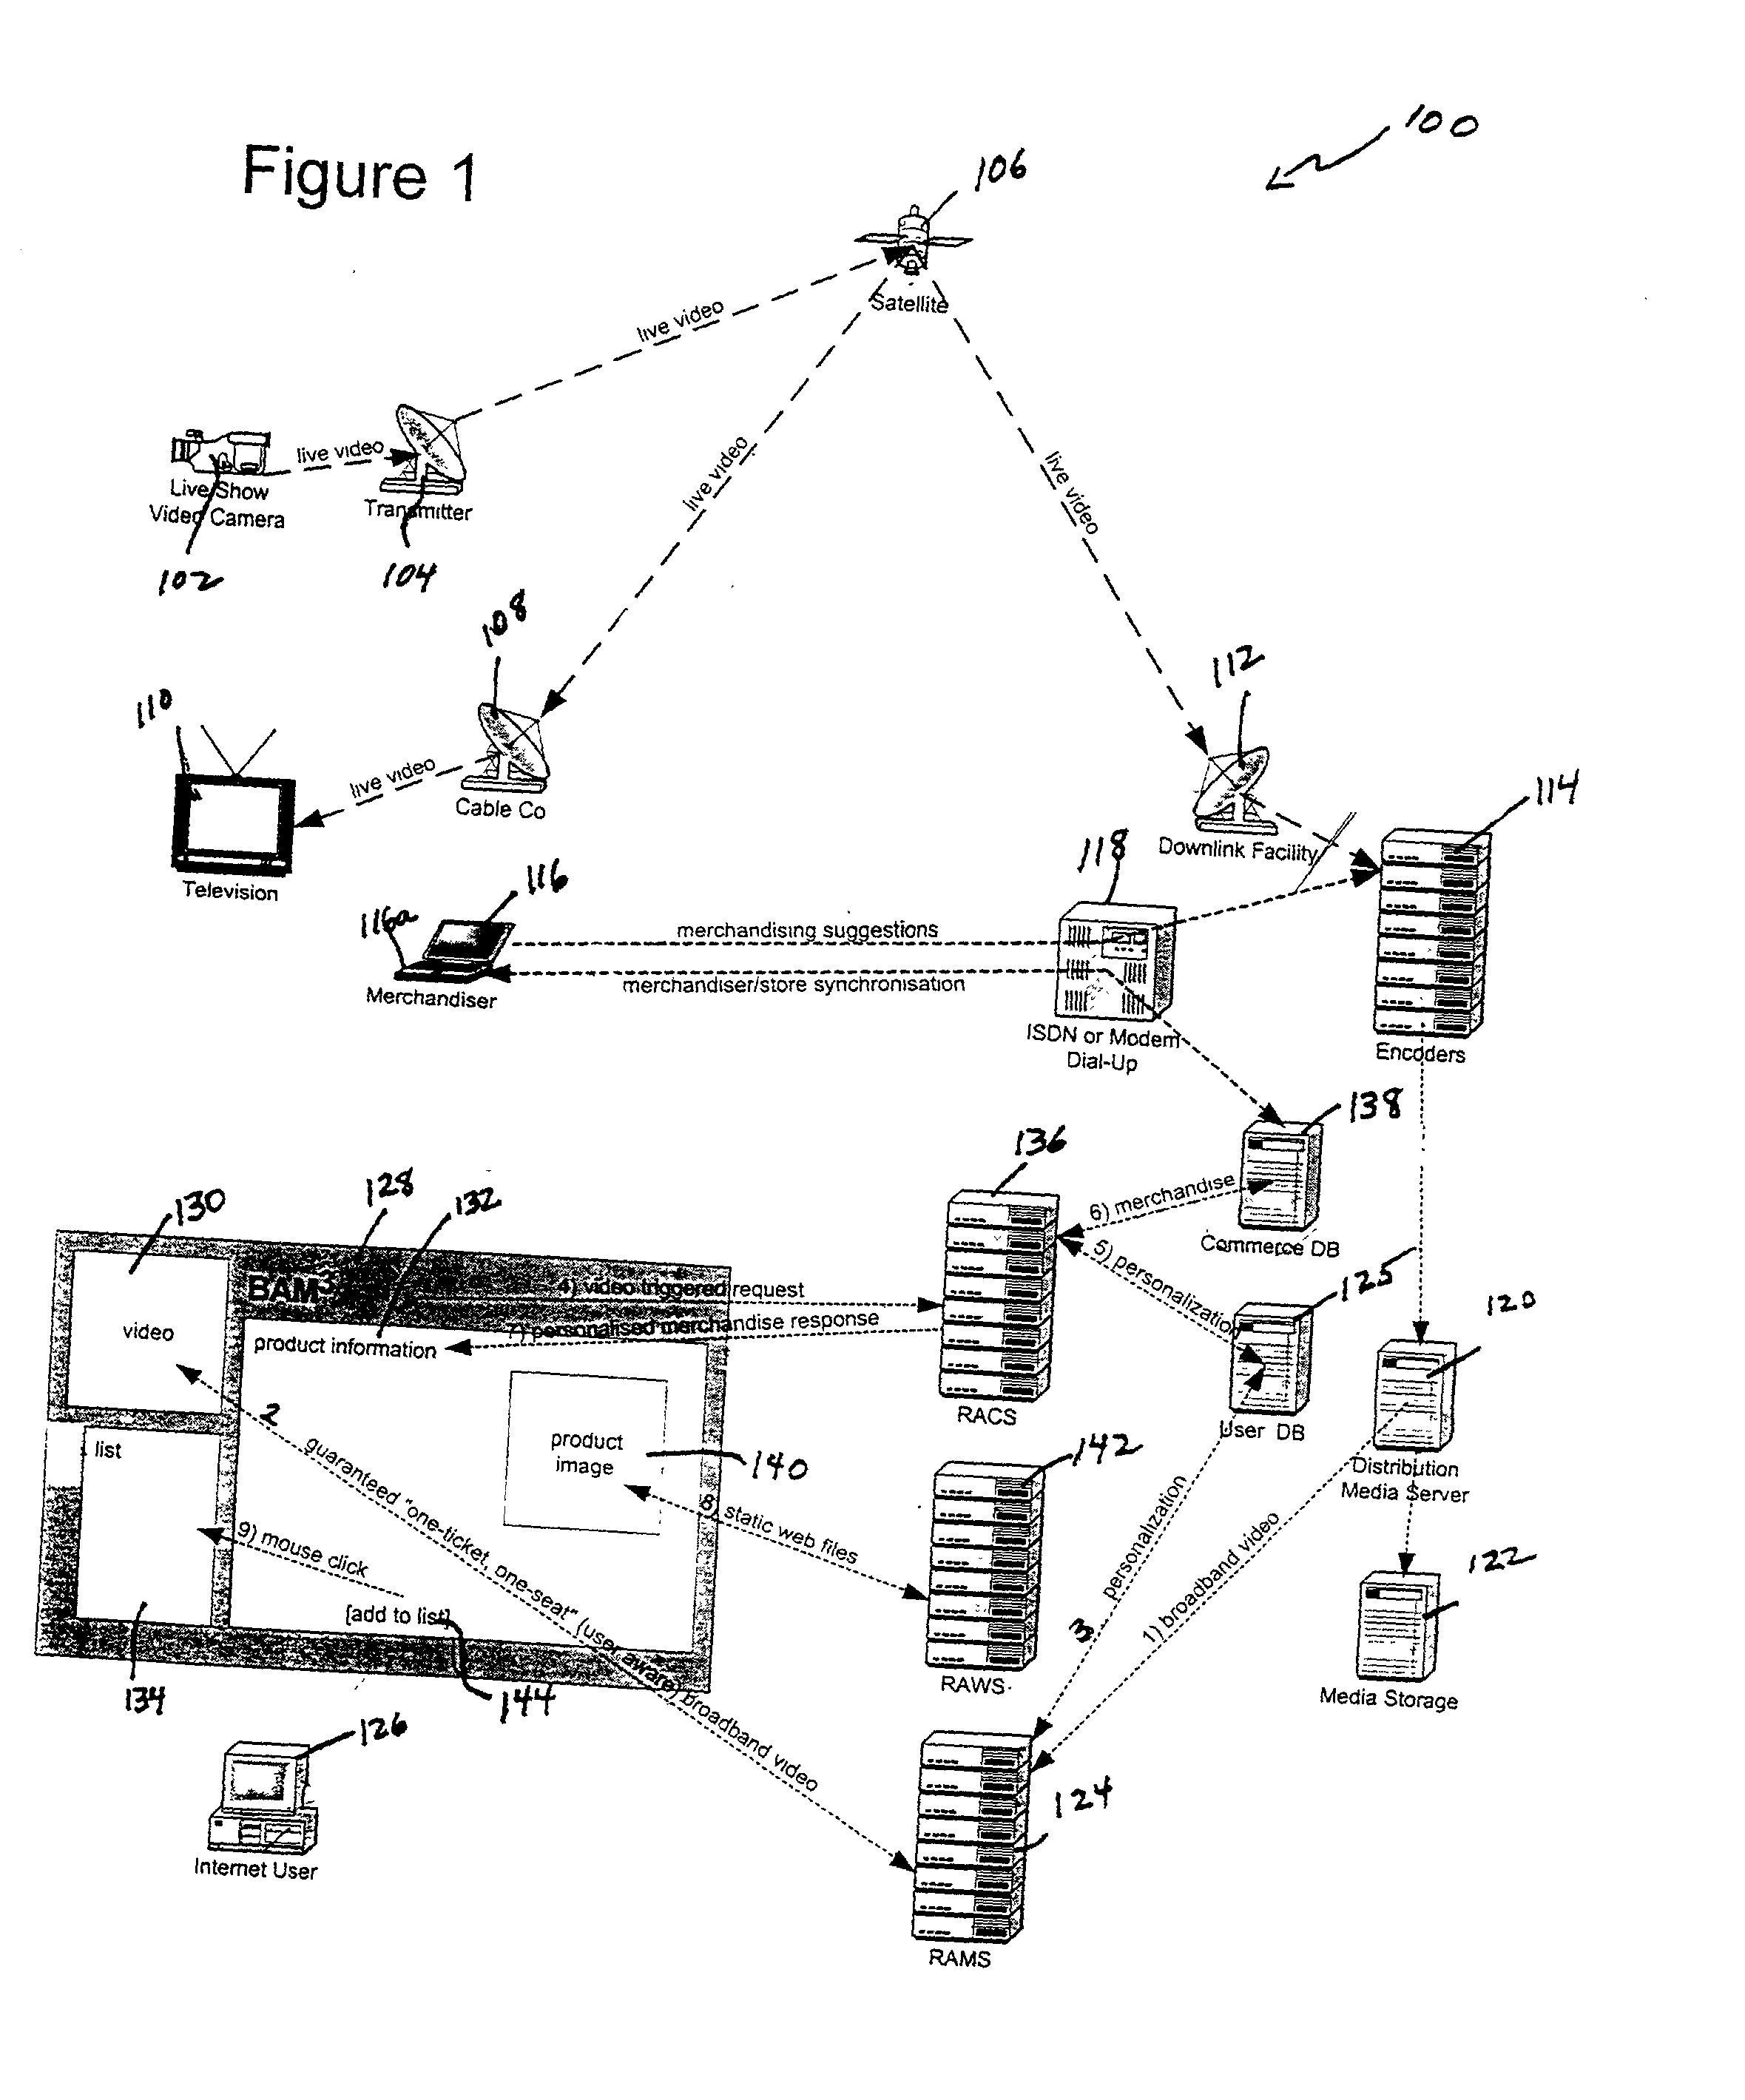 Video enhanced electronic commerce systems and methods